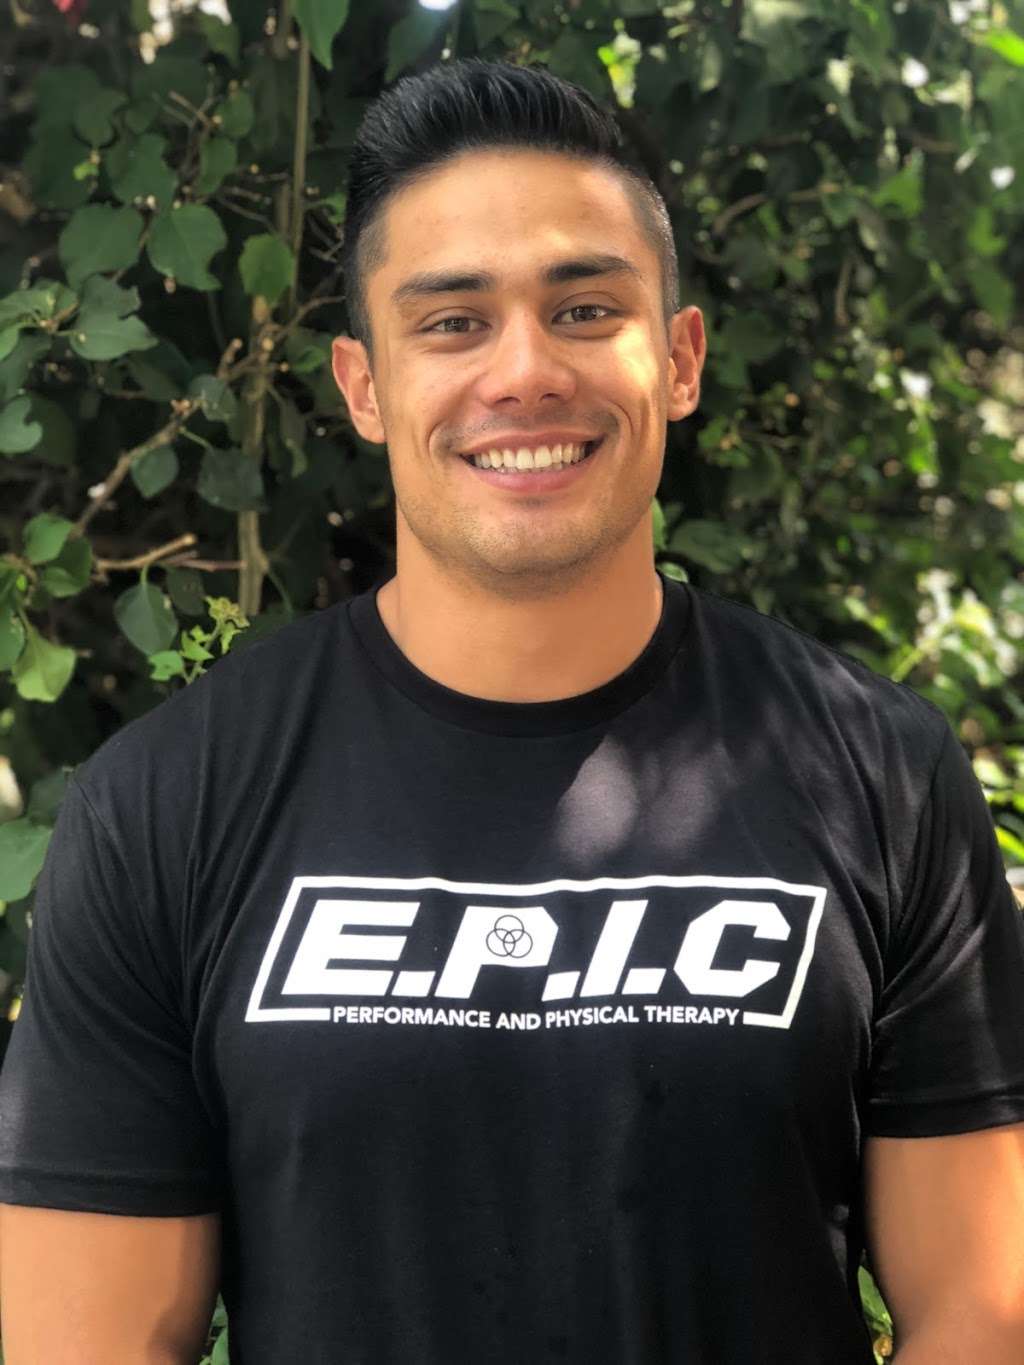 E.P.I.C Performance and Physical Therapy | 4030 Sports Arena Blvd, San Diego, CA 92110 | Phone: (909) 561-7079